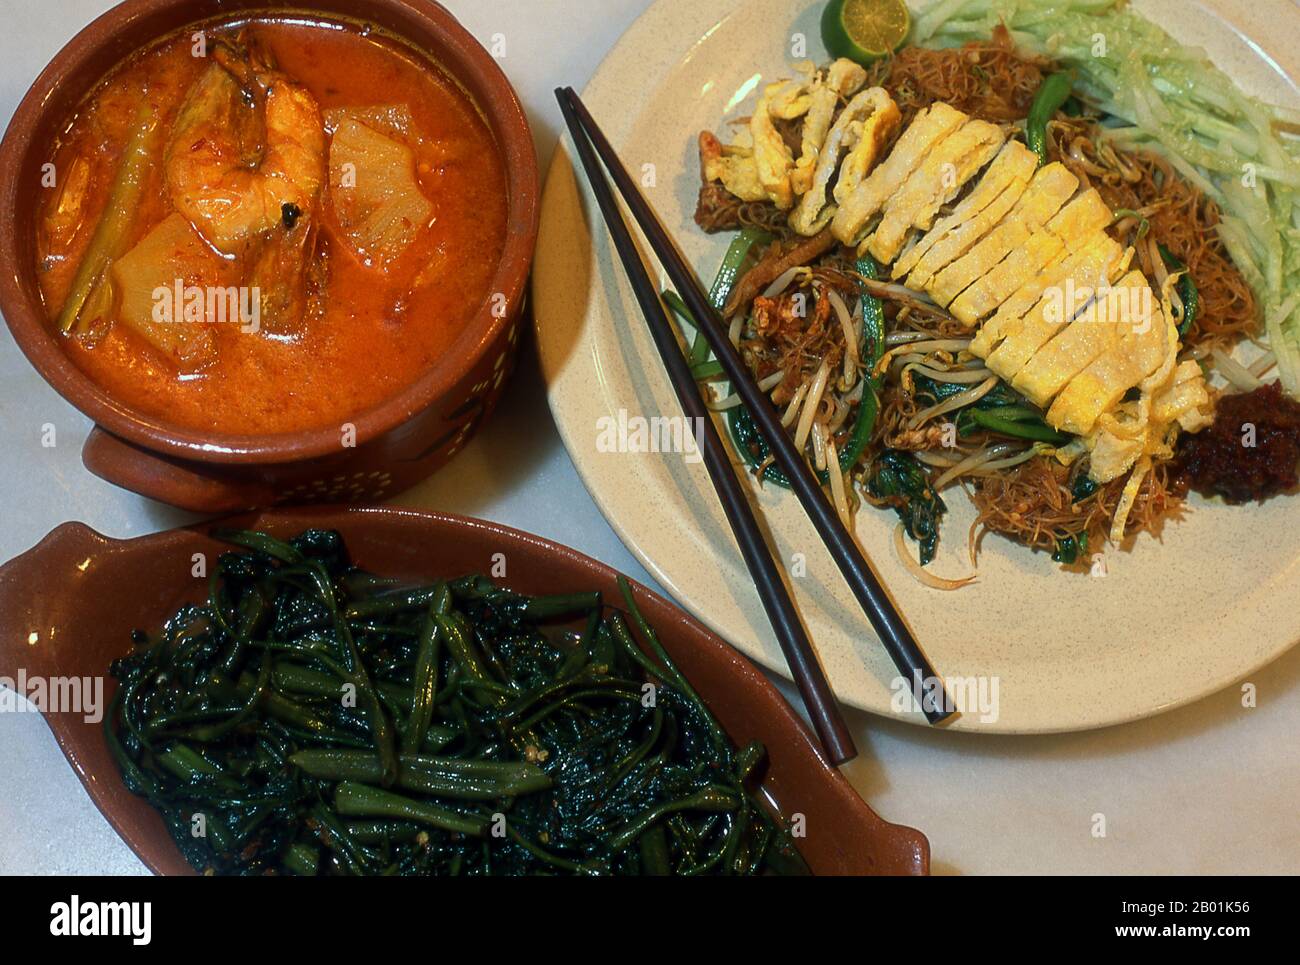 Malaysia/Thailand: Typical Nonya cuisine found in Melaka, Penang and Phuket.  Peranakan Chinese and Baba-Nyonya are terms used for the descendants of late 15th and 16th-century Chinese immigrants to the Malay-Indonesian archipelago of Nusantara during the Colonial era.  Members of this community in Malaysia identify themselves as 'Nyonya-Baba' or 'Baba-Nyonya'. Nyonya is the term for the females and Baba for males. It applies especially to the ethnic Chinese populations of the British Straits Settlements of Malaya and the Dutch-controlled island of Java and other locations. Stock Photo